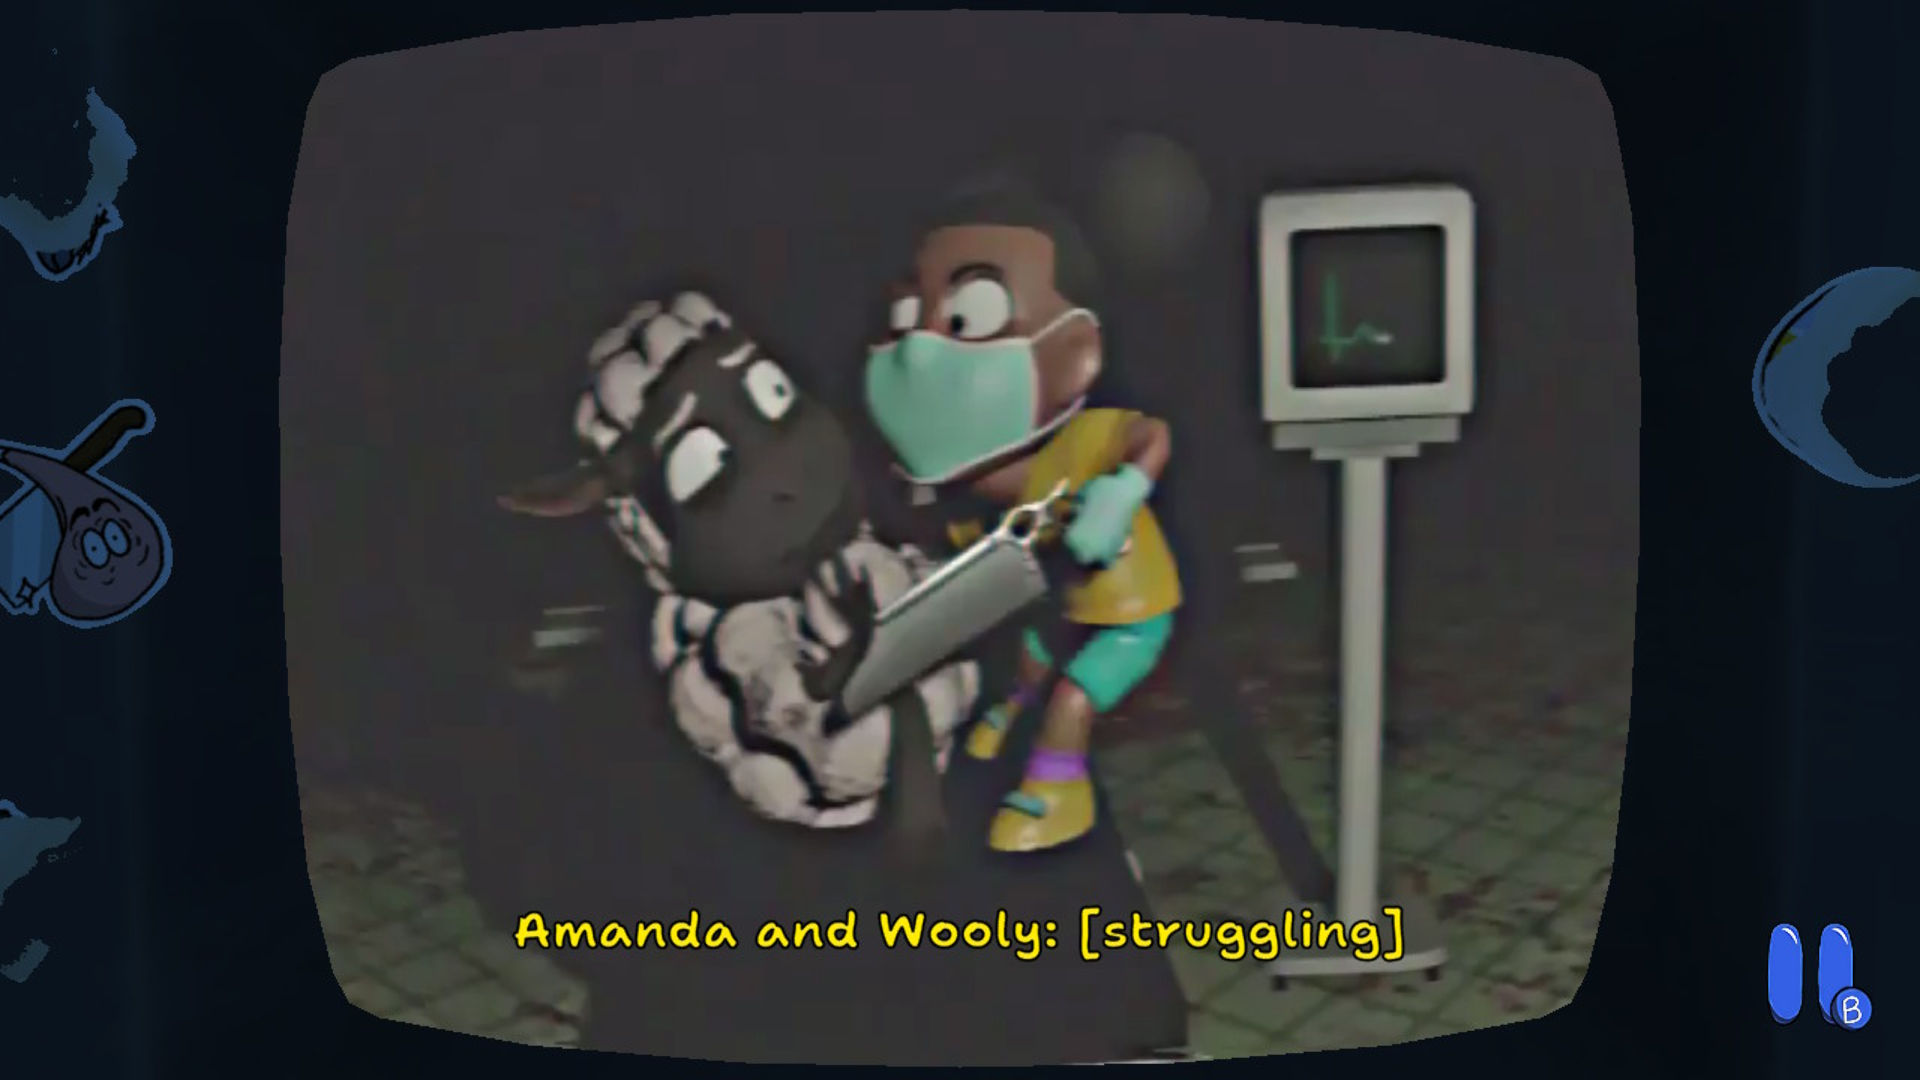 Who is Amanda the Adventurer's Wooly?